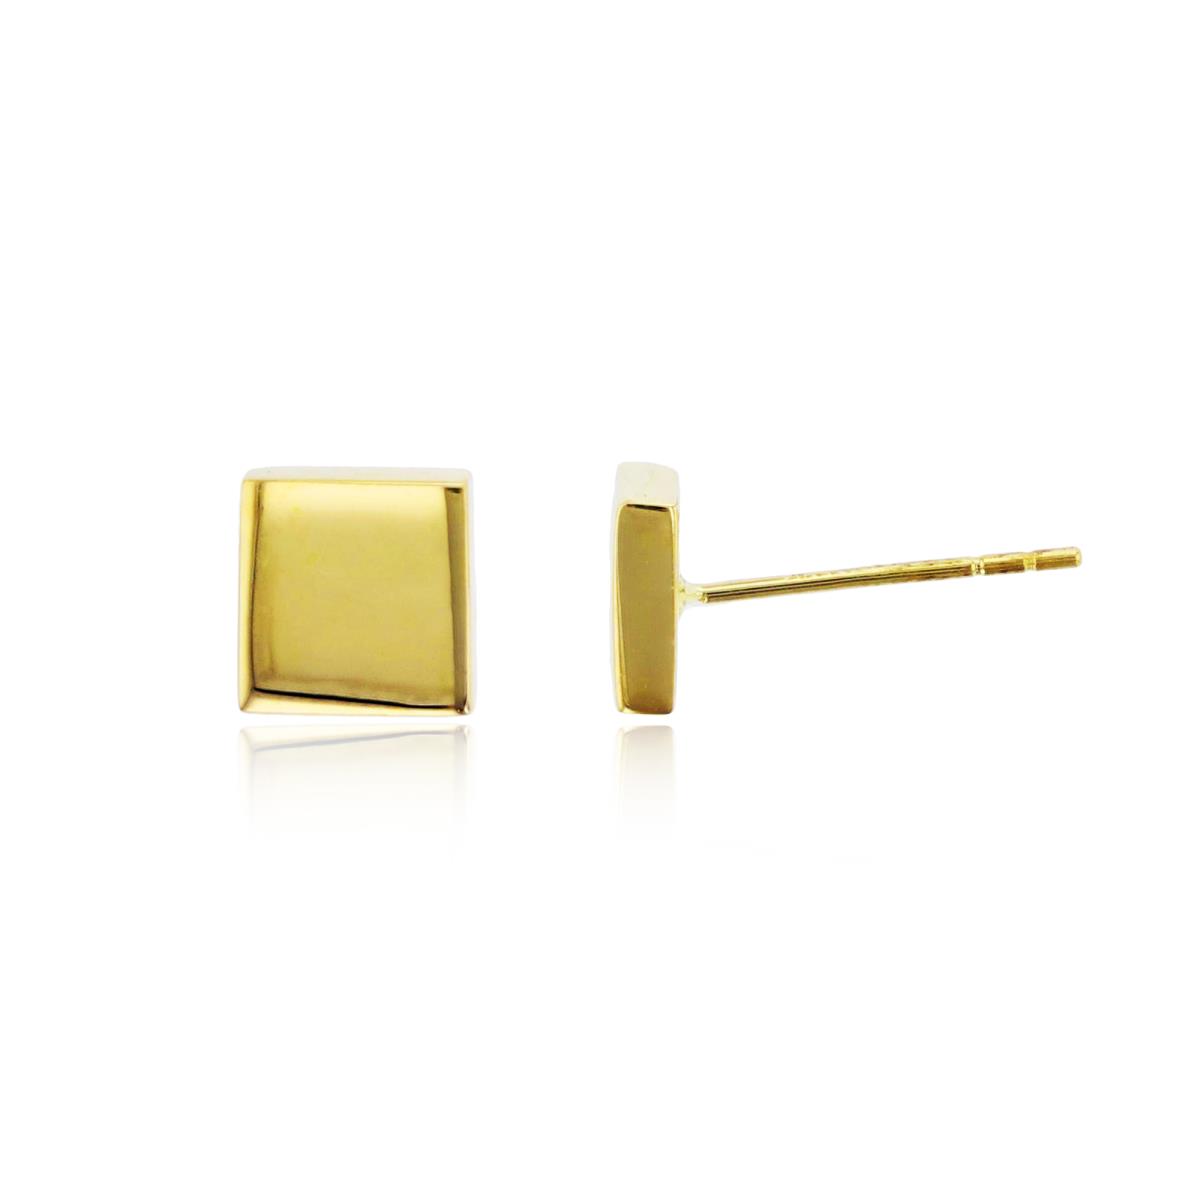 14K Yellow Gold 6mm Polished Square Stud Earring (No Back)